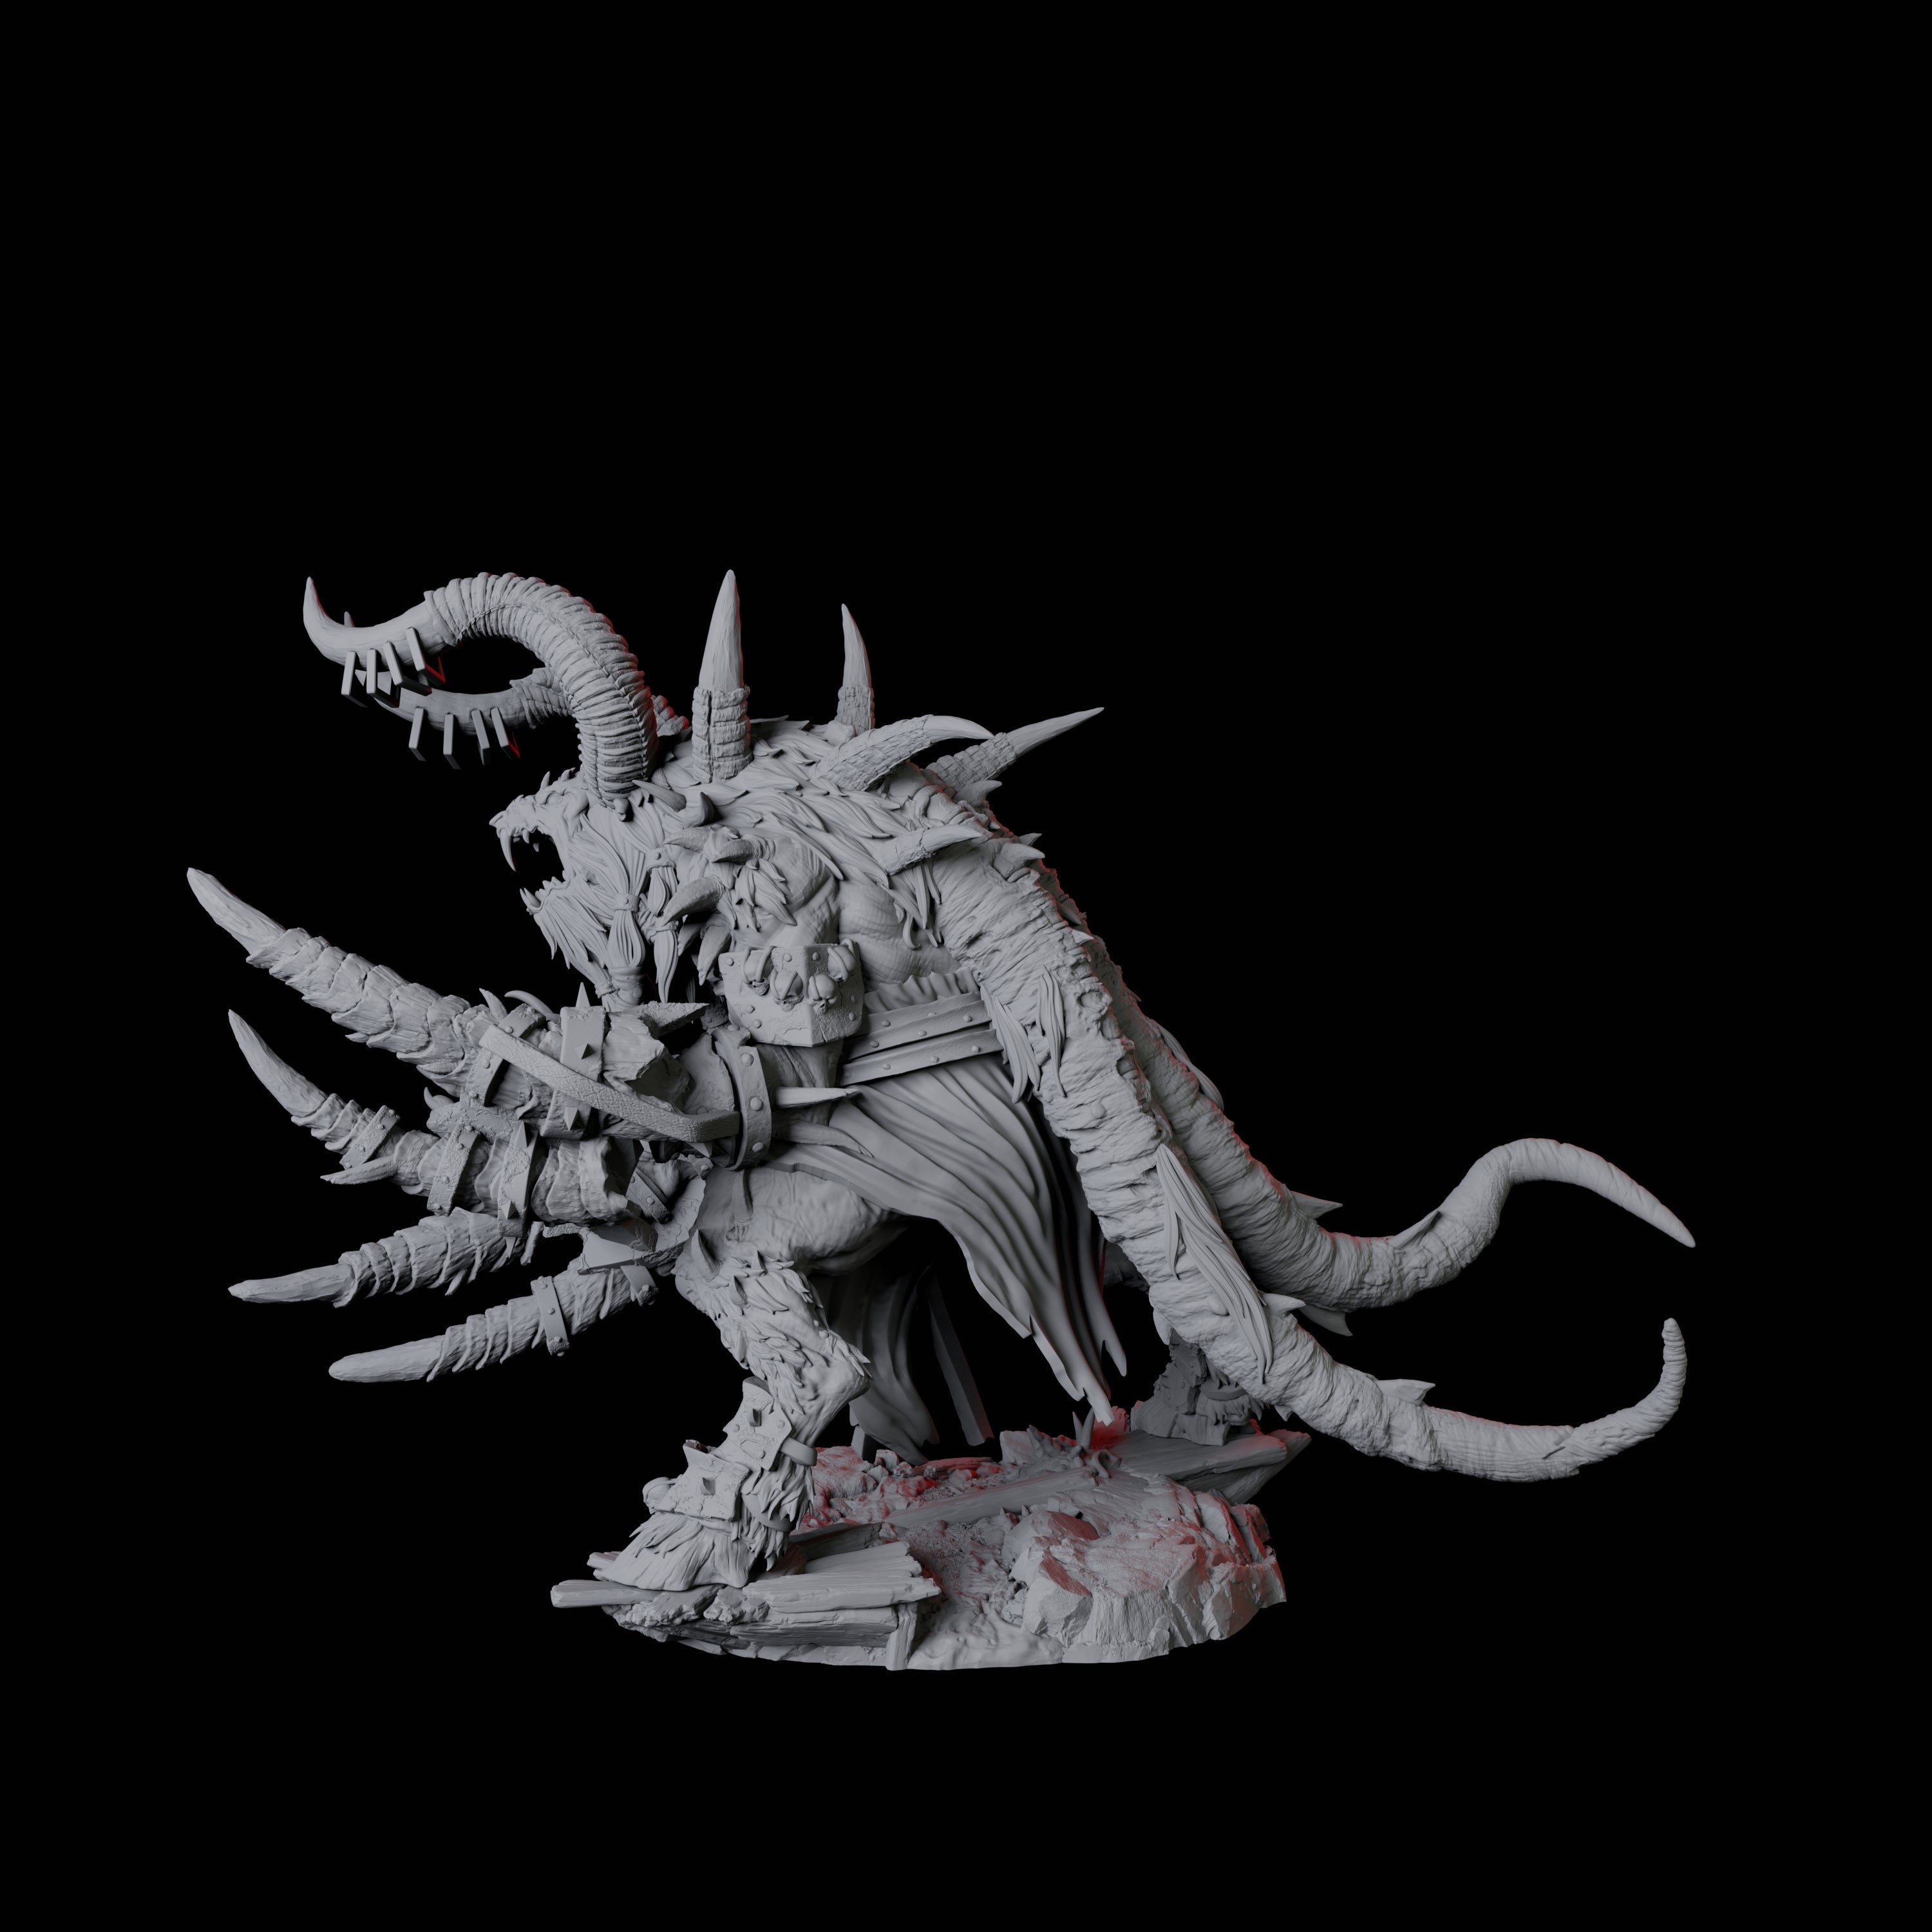 Giant Ratfolk Barbarian D Miniature for Dungeons and Dragons, Pathfinder or other TTRPGs